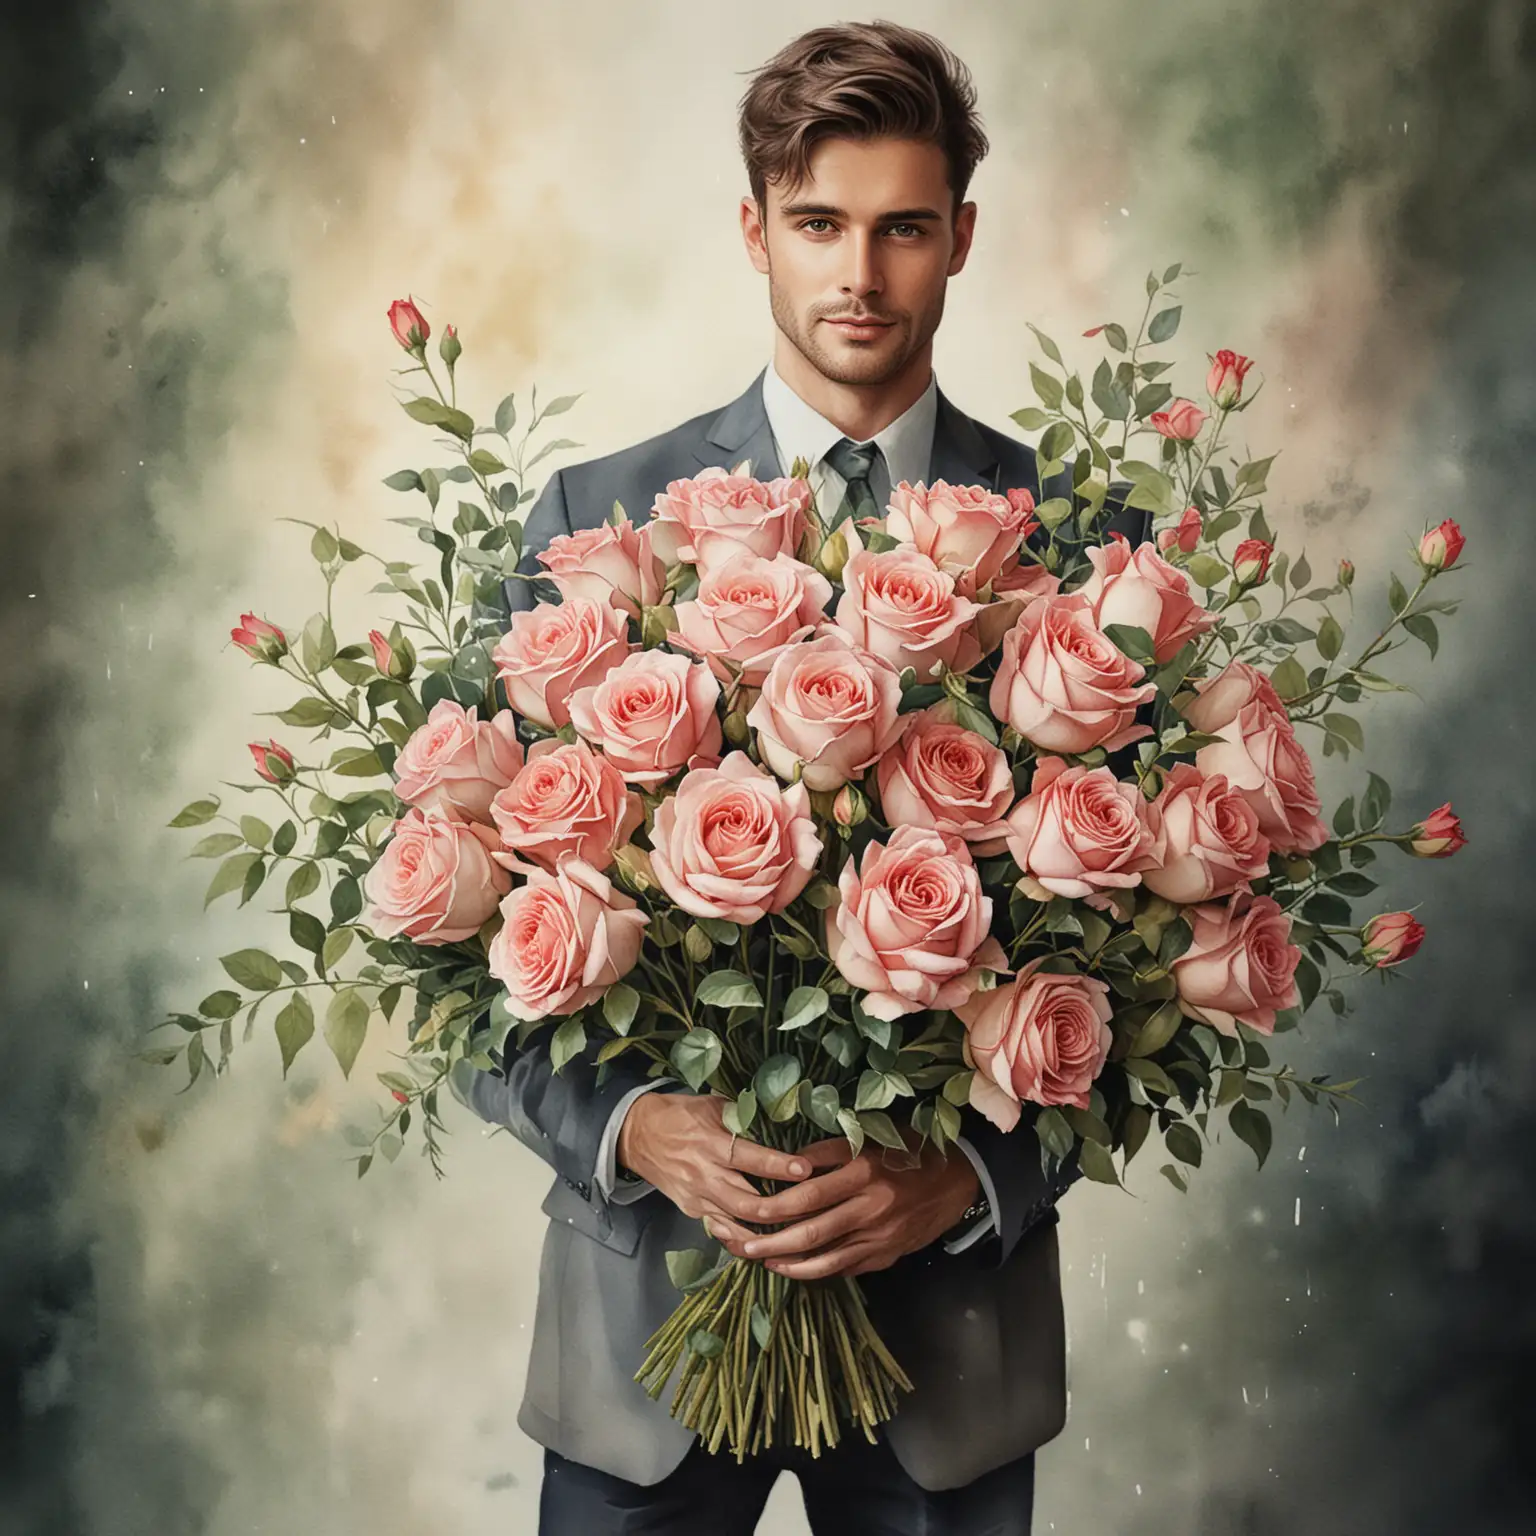 Handsome Man Holding Large Bouquet of Roses in Watercolor